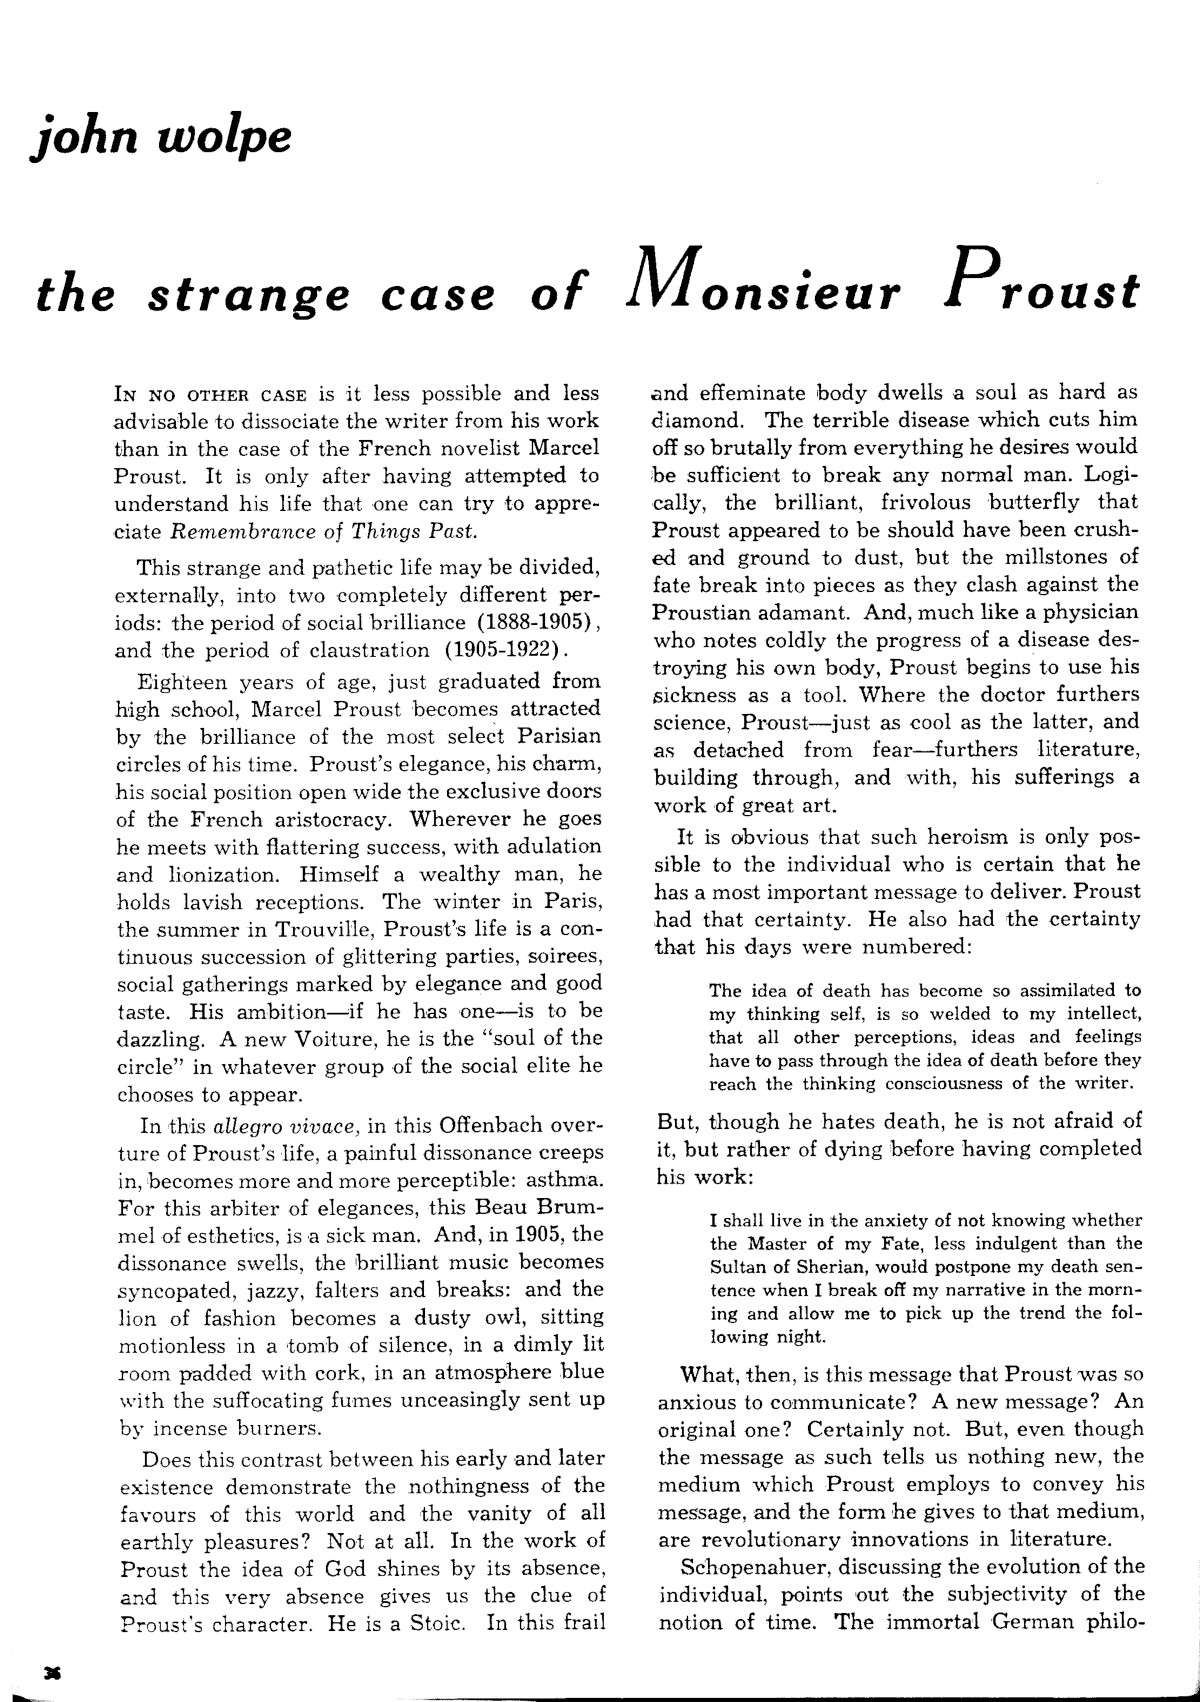 Article about Proust's "Remembrance of Things Past." // Creative Campus, January 1949, pp. 36-40.